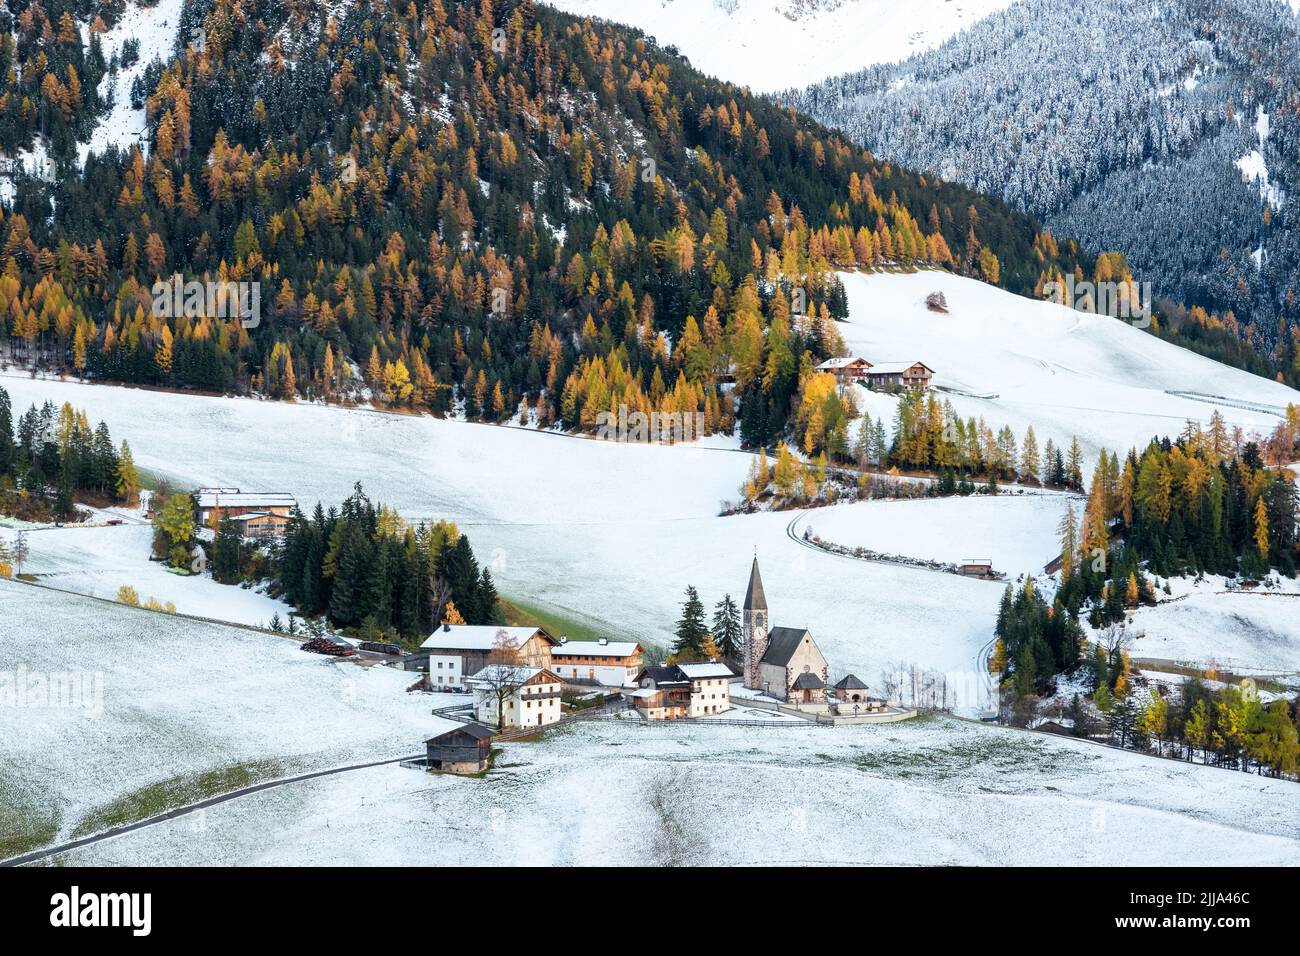 Famous Santa Magdalena mountain village with Church Chiesa di Santa Maddalena in the autumn Dolomites. Snowy Gruppo delle Odle mountain range in the background. Val di Funes, South Tyrol, Italy Stock Photo